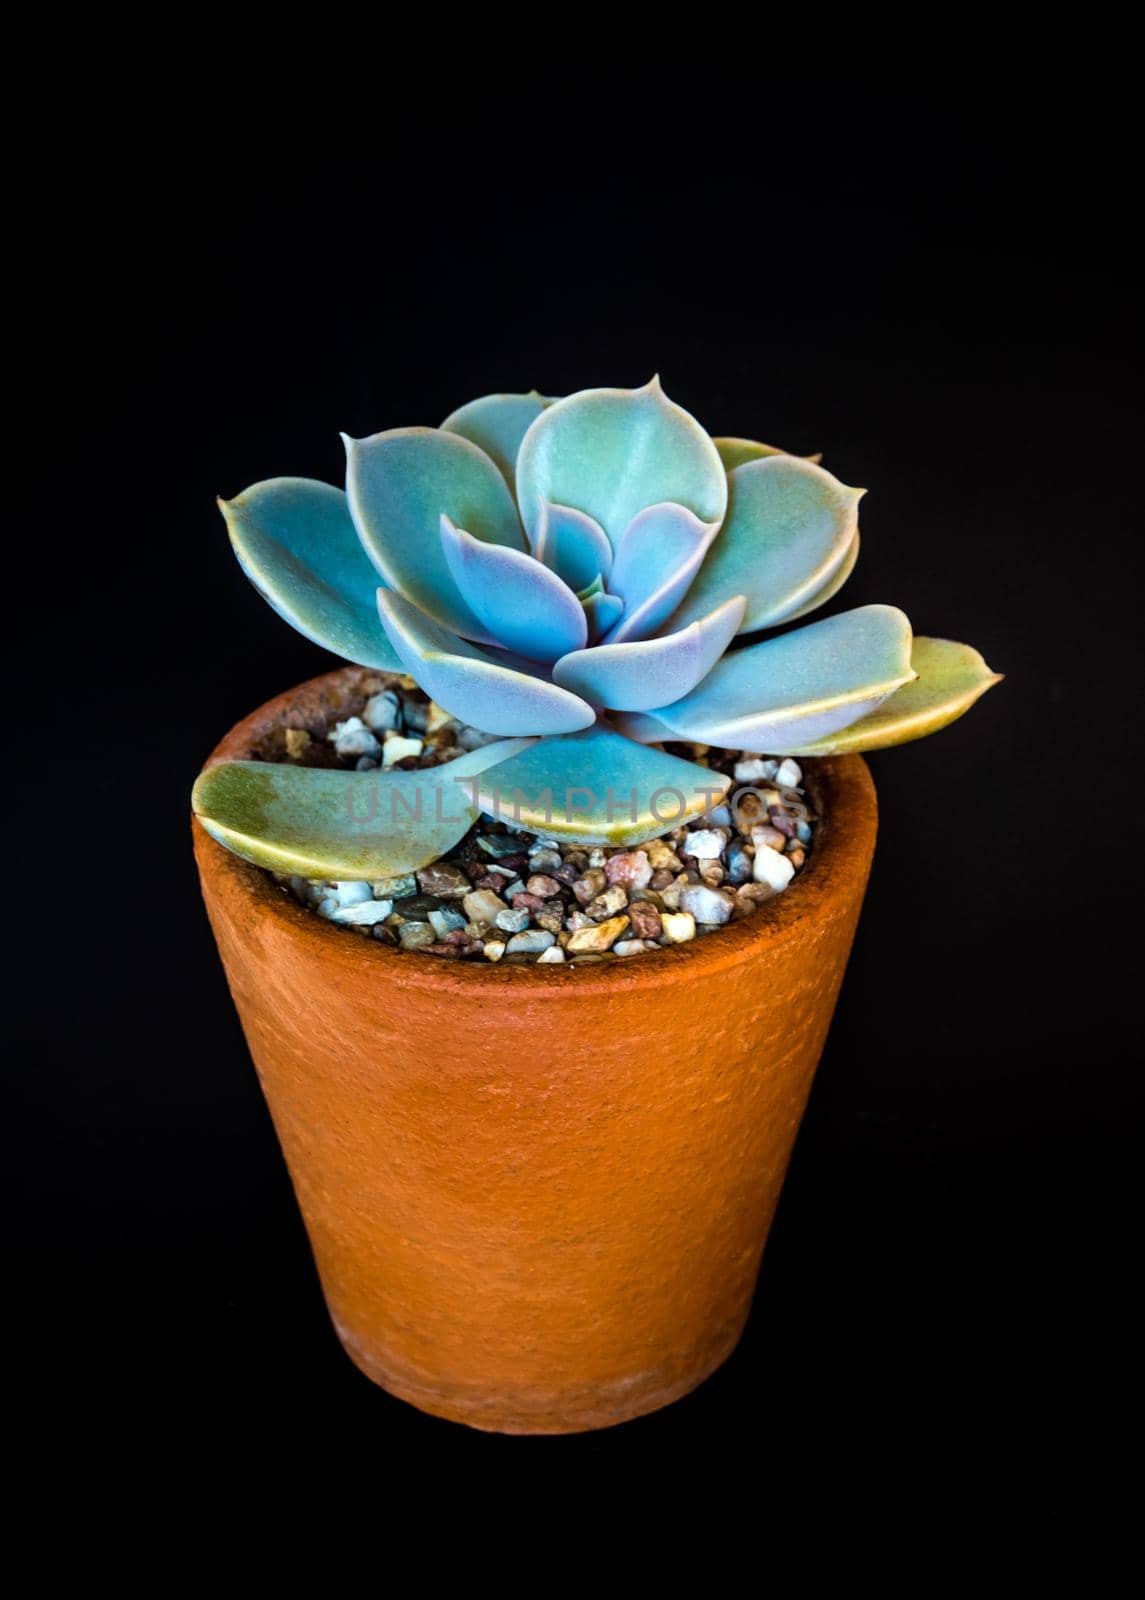 Earthenware pot and freshness leaves of Echeveria Gibbiflora in tiny light on black background, high contrast